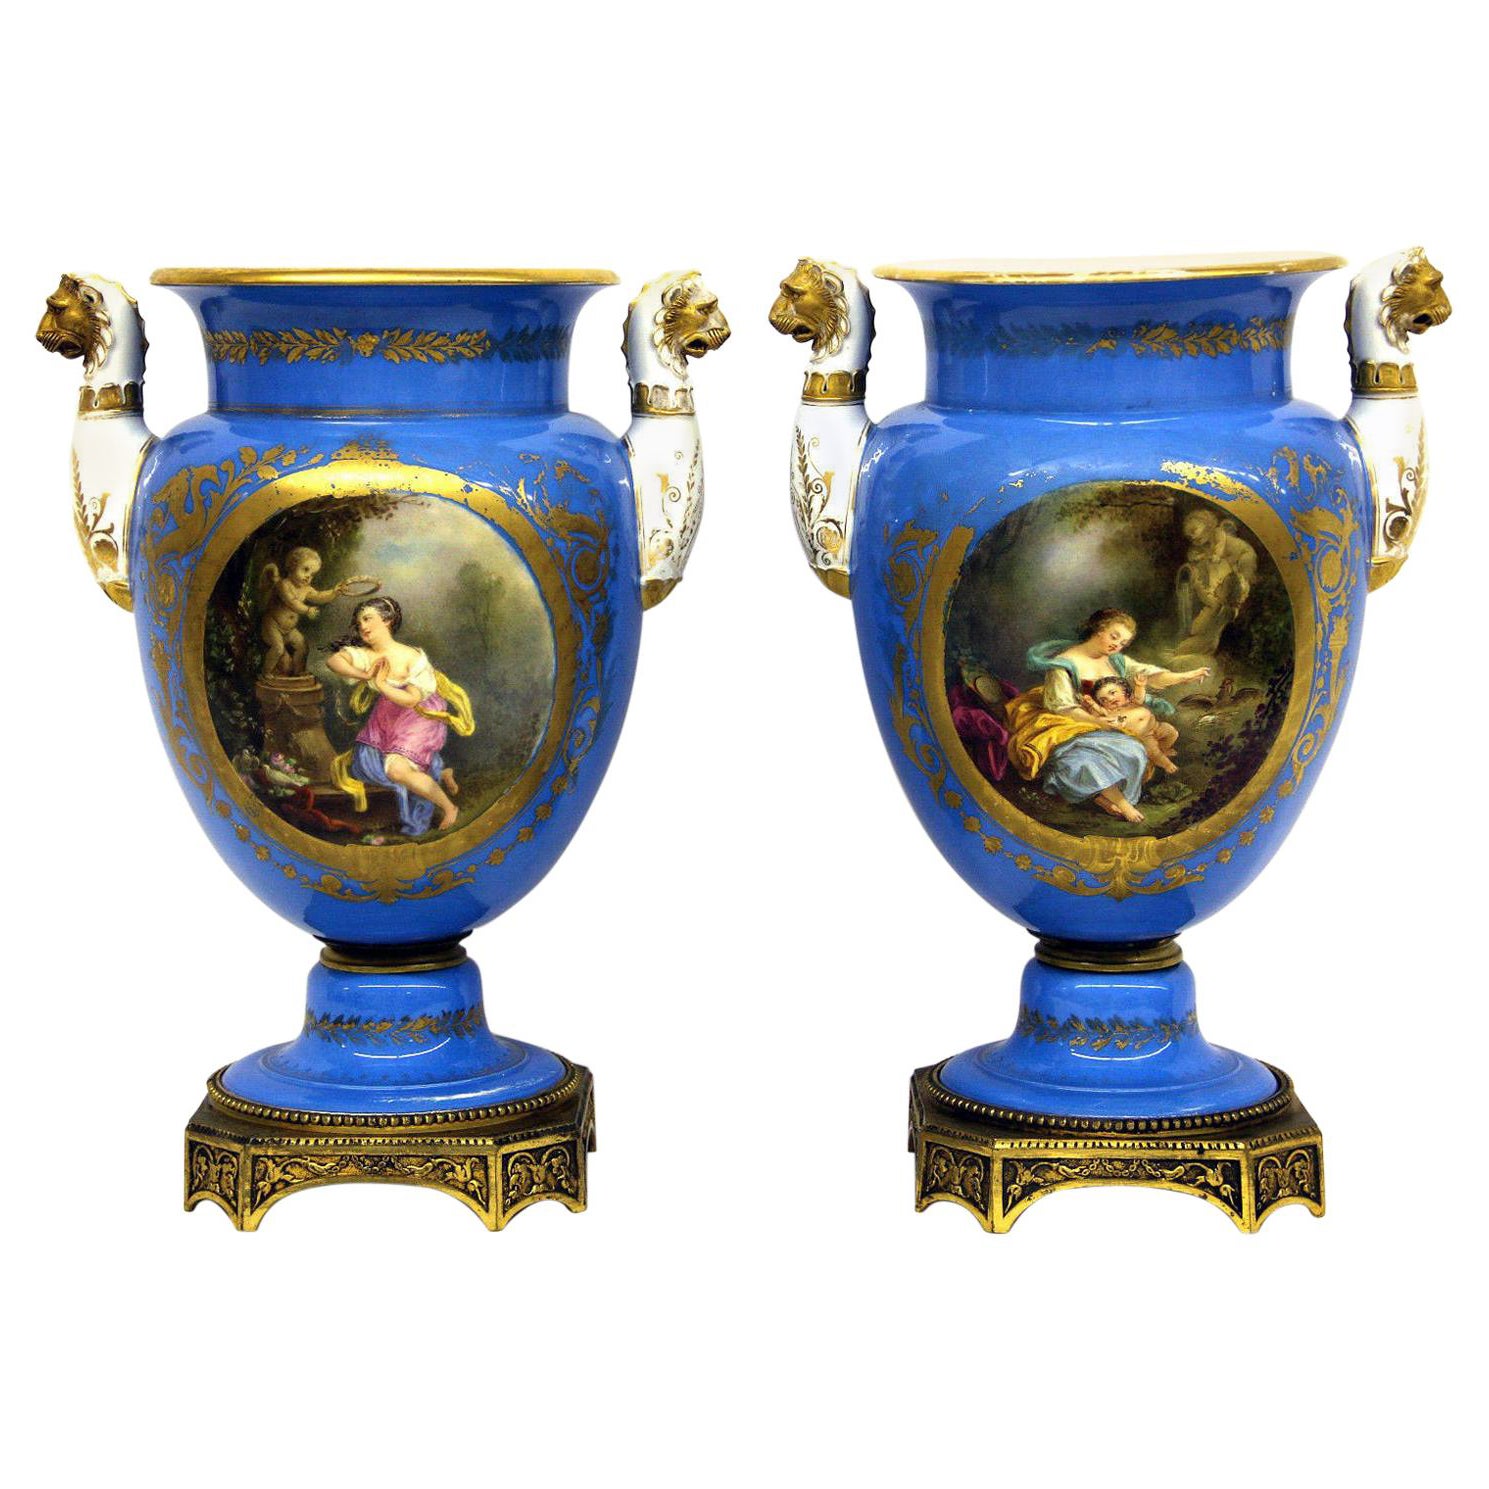 Pair of Late 19th Century Gilt Bronze and Sky Blue Sèvres Style Porcelain Vases For Sale